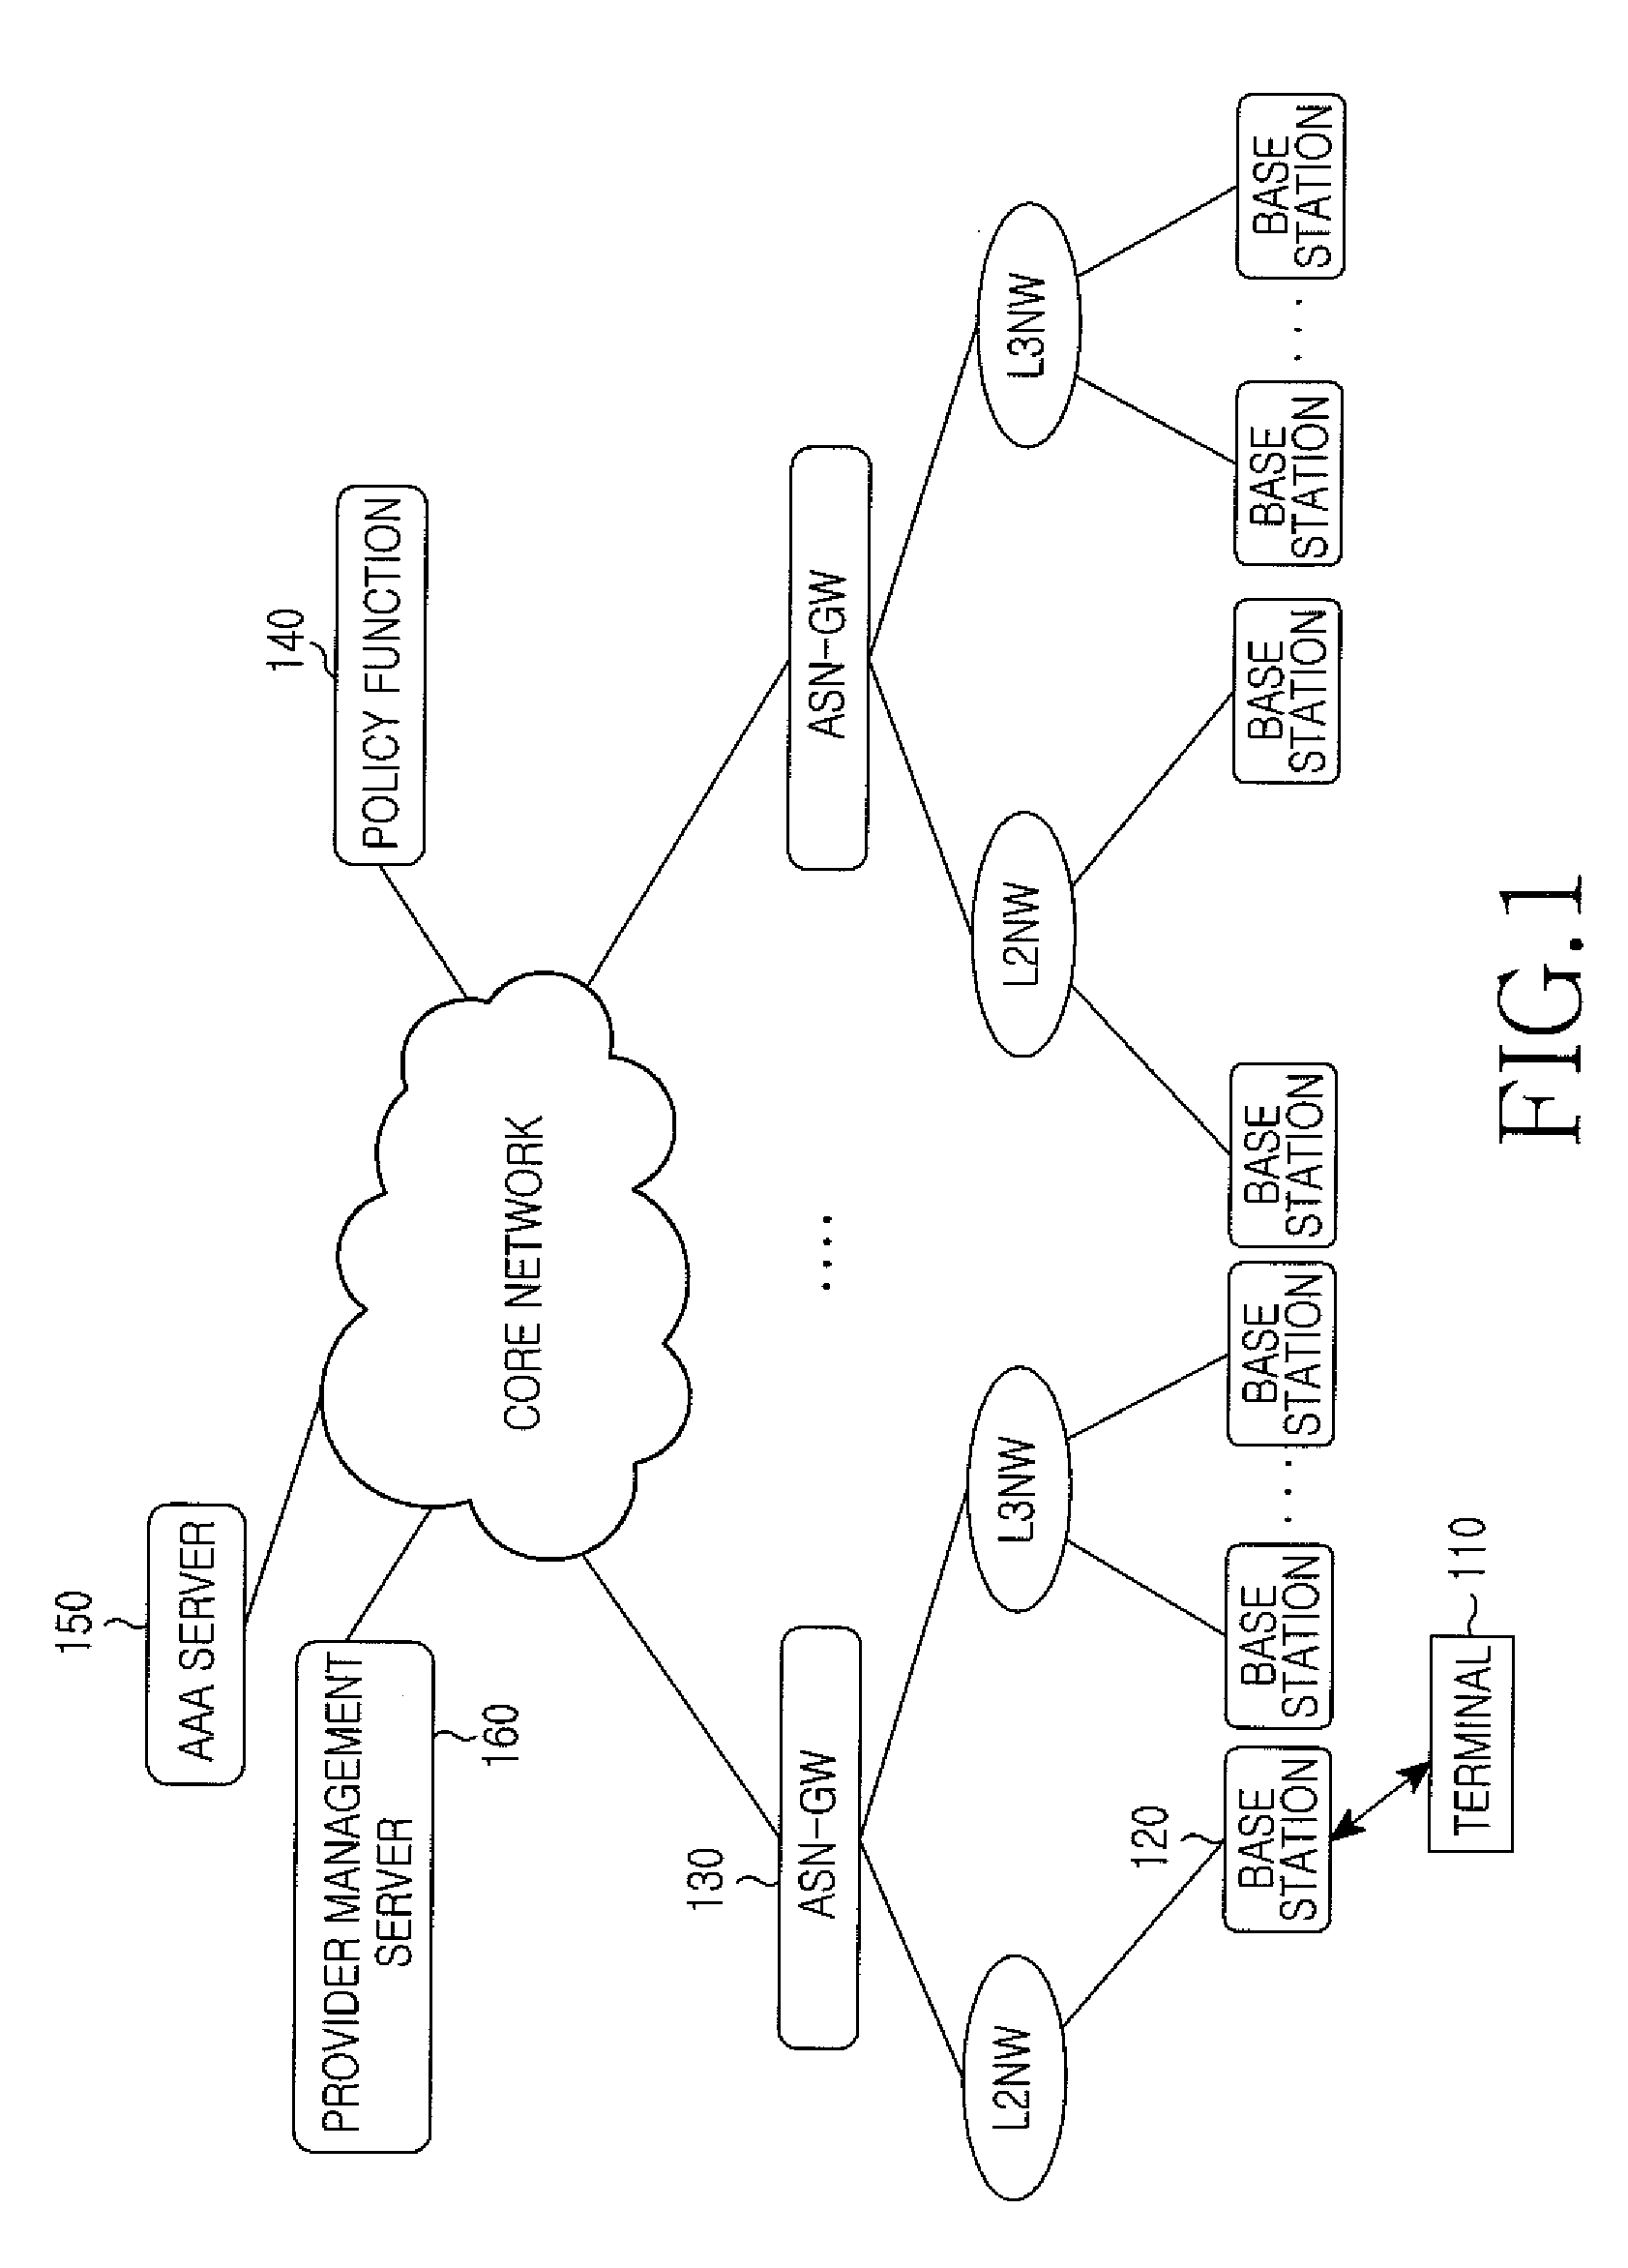 NETWORK ARCHITECTURE FOR DYNAMICALLY SETTING END-TO-END QUALITY OF SERVICE (QoS) IN A BROADBAND WIRELESS COMMUNICATION SYSTEM